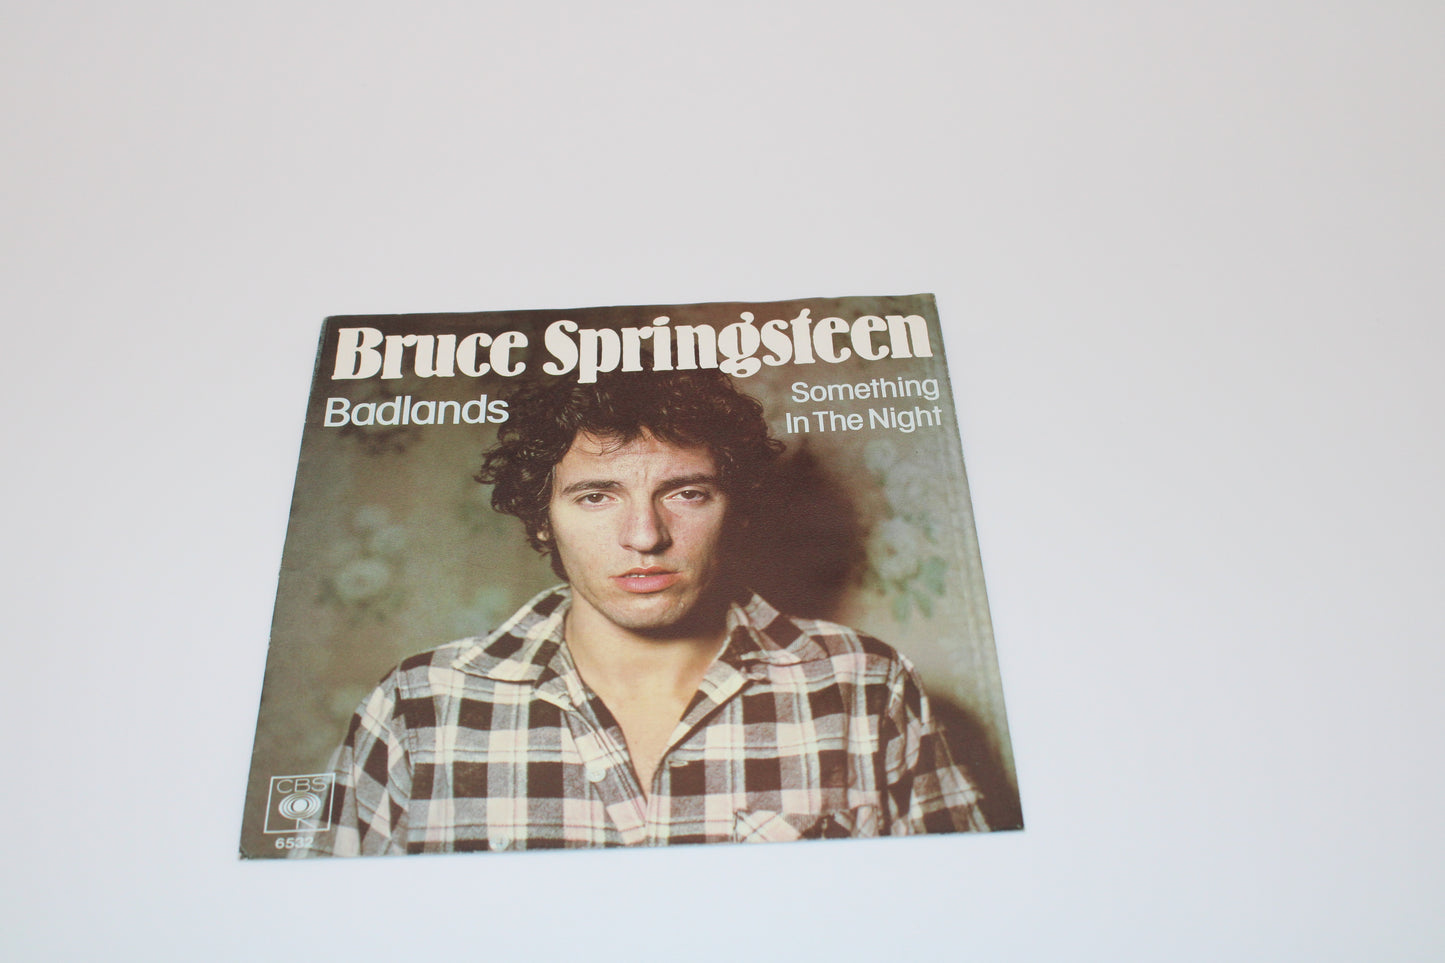 Bruce Springsteen 45 record Badlands & Something in the Night 1978 German Import